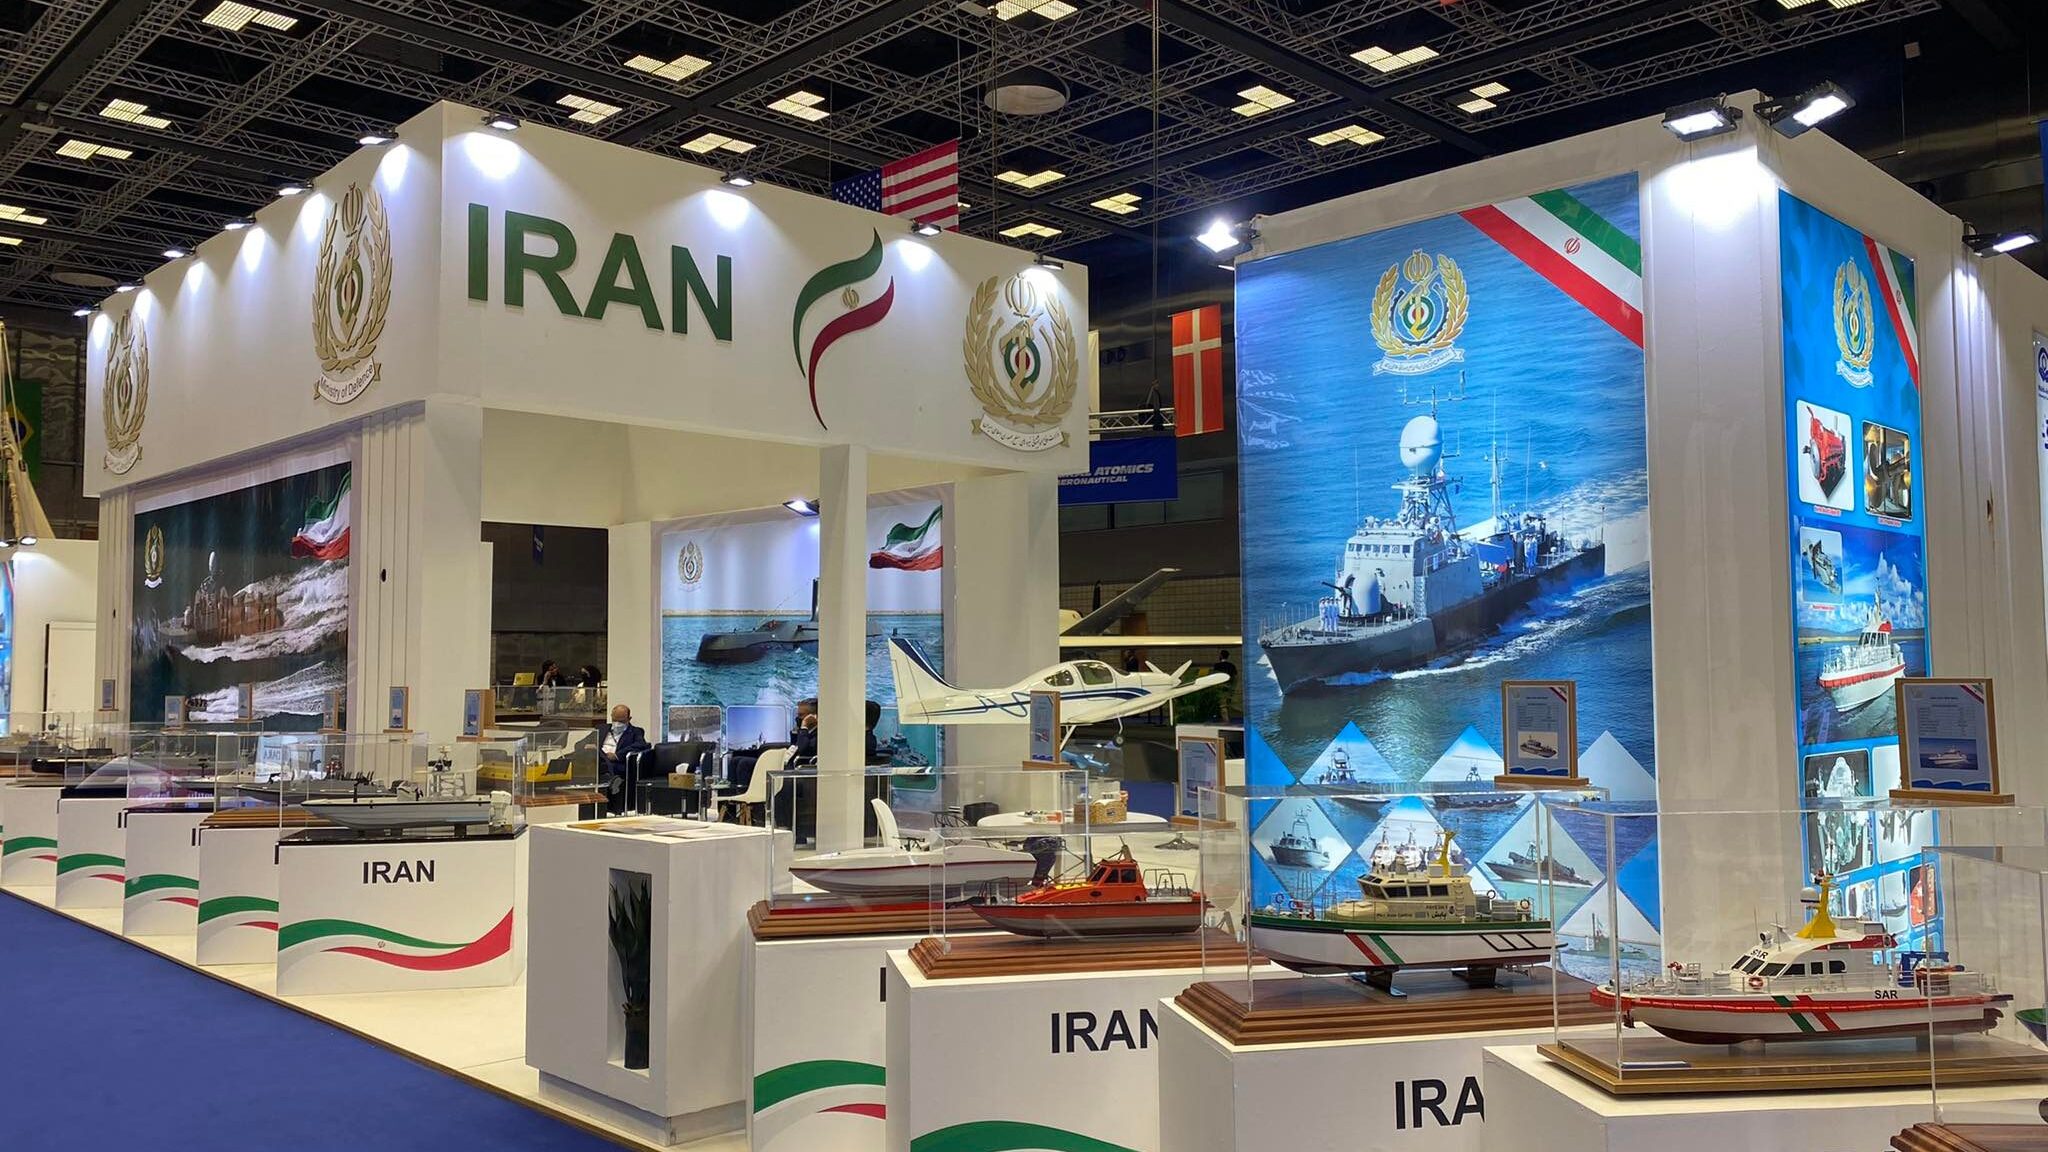 Drones, Iran’s presence and Qatari branding: The notable sights from DIMDEX